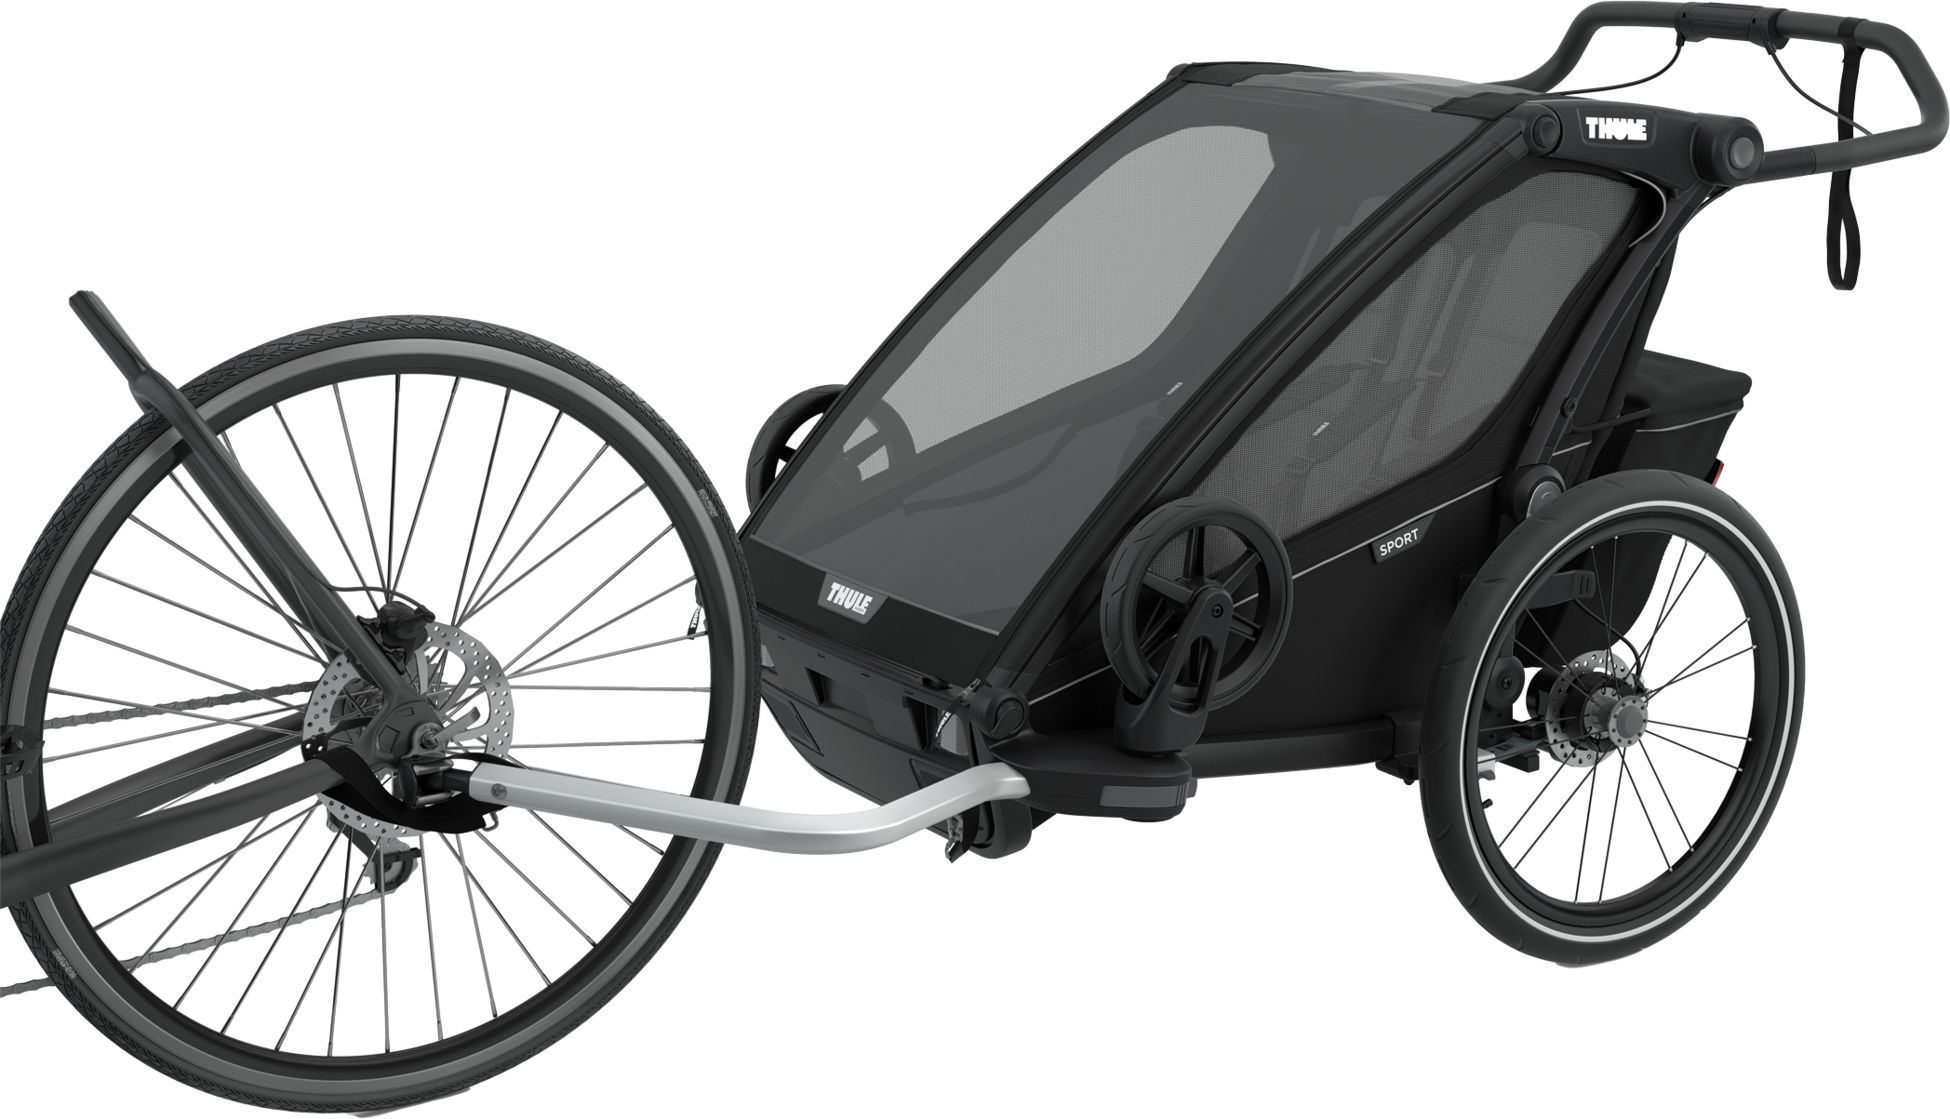 THULE, CHARIOT SPORT2